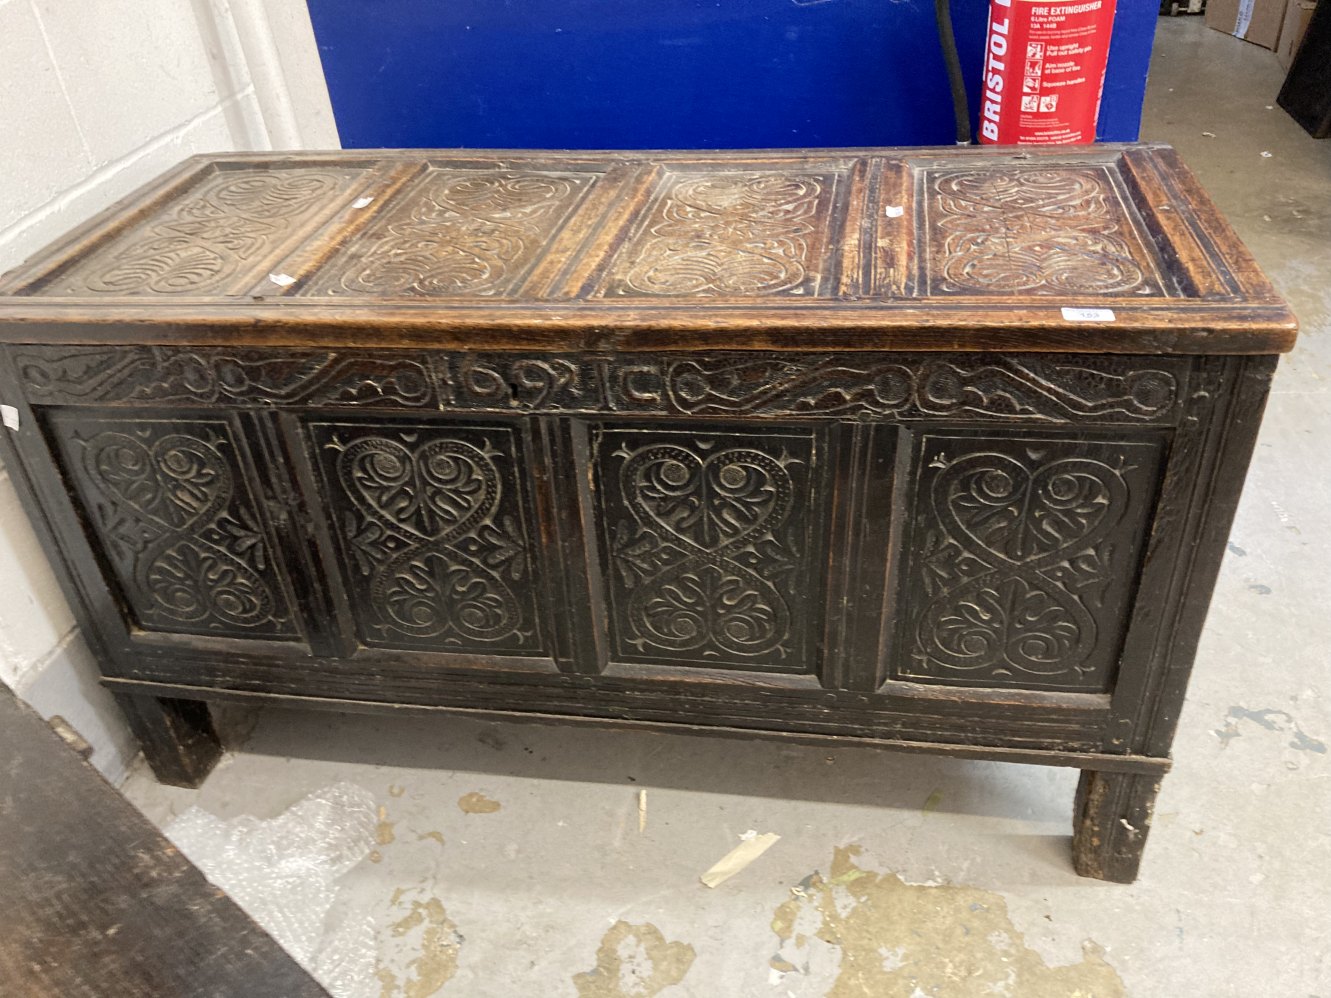 Antique oak coffer with four panelled top and front with carved panels. Carved frieze with date 1692